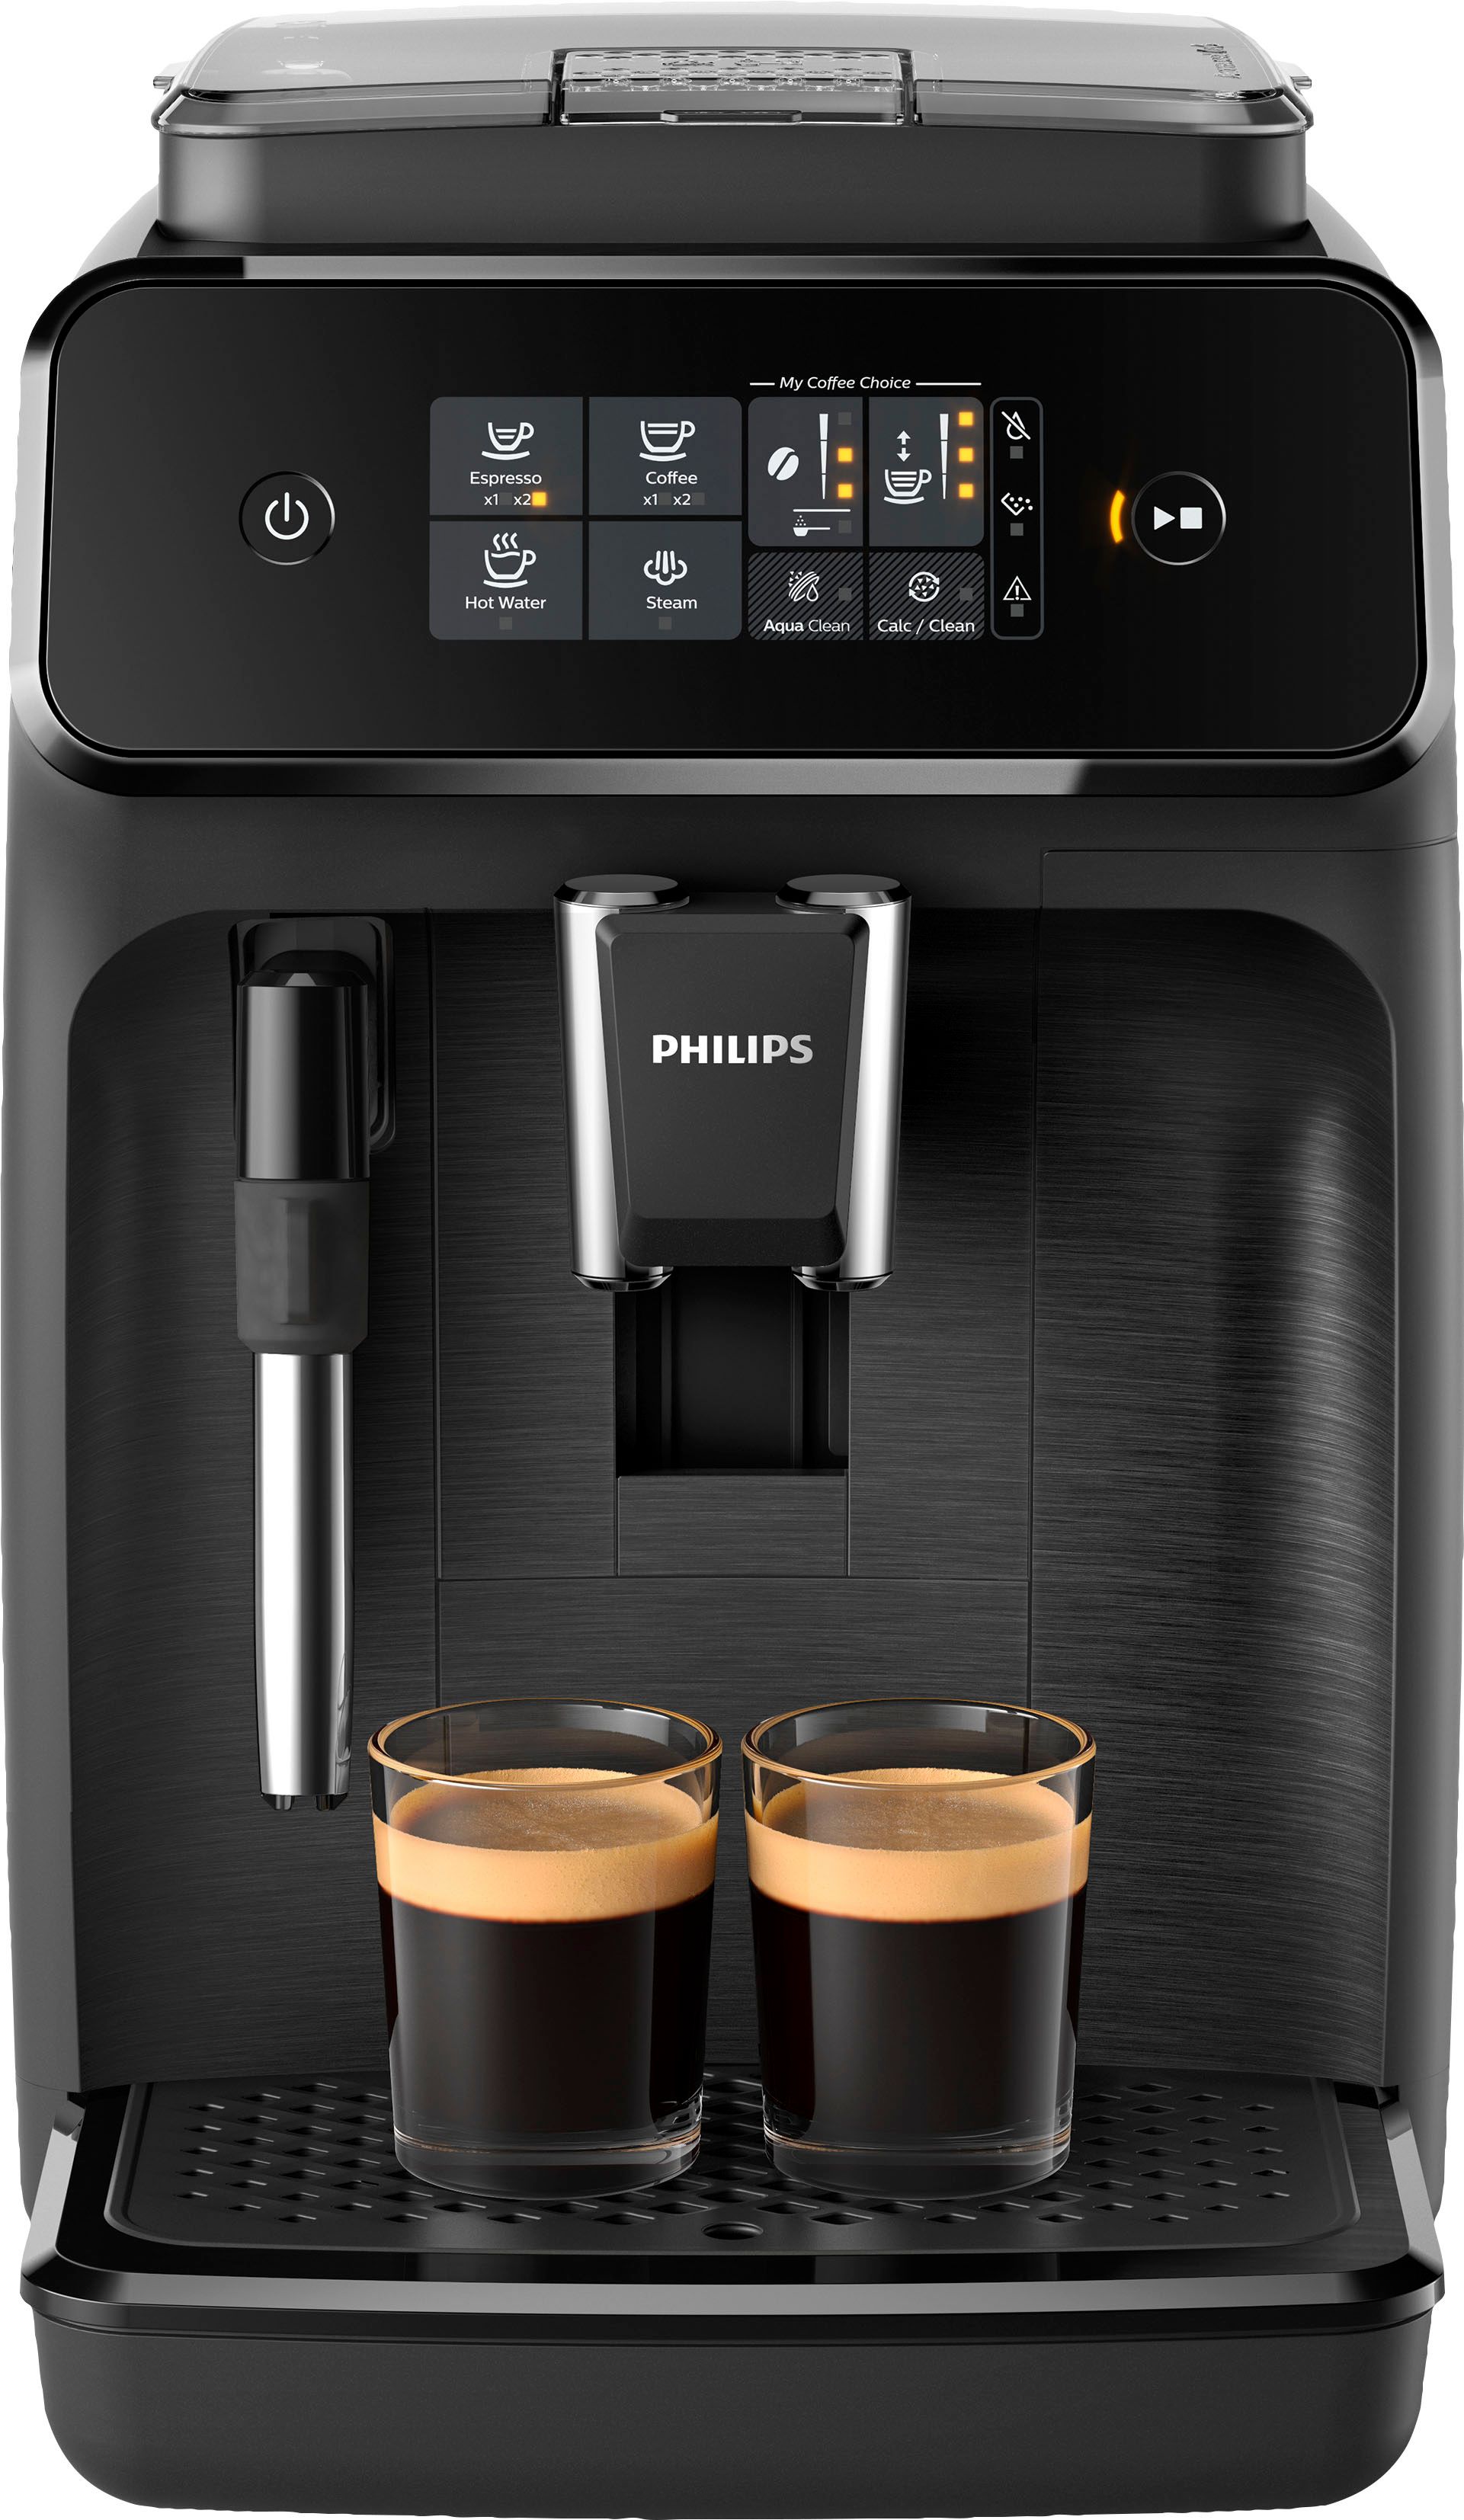 Philips 1200 Series Fully Automatic Espresso Machine with Milk Frother Black EP1220/04 - Best Buy | Best Buy U.S.